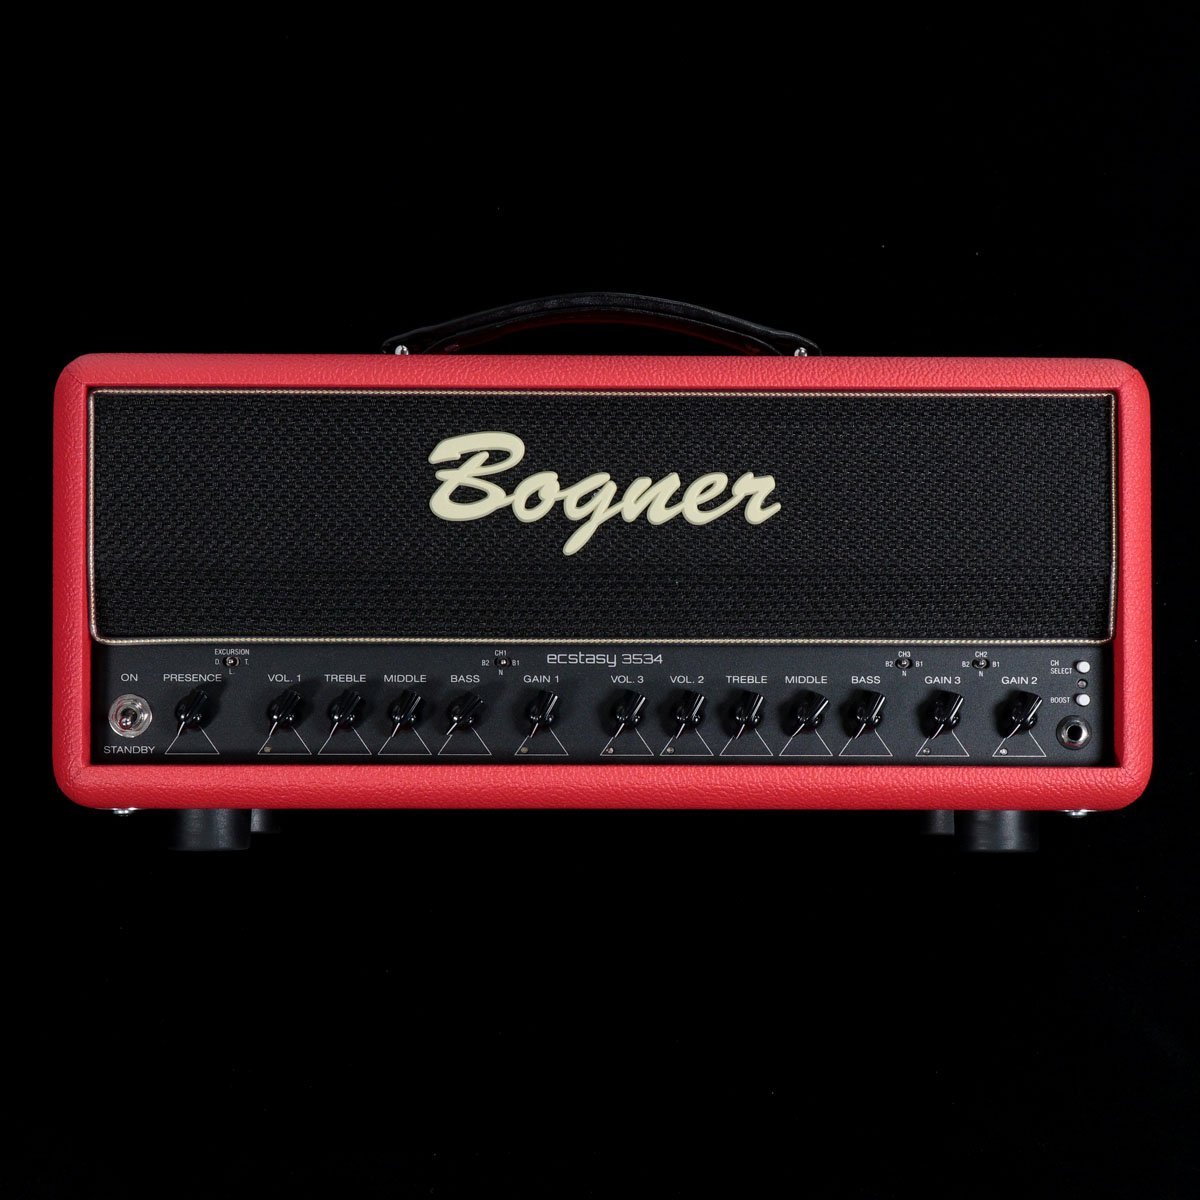 Bogner ECSTASY 3534 3CH Coustom Color Red Tolex ⁄ Black Grill ⁄ Gold  Piping渋谷店（新品⁄送料無料）楽器検索デジマート